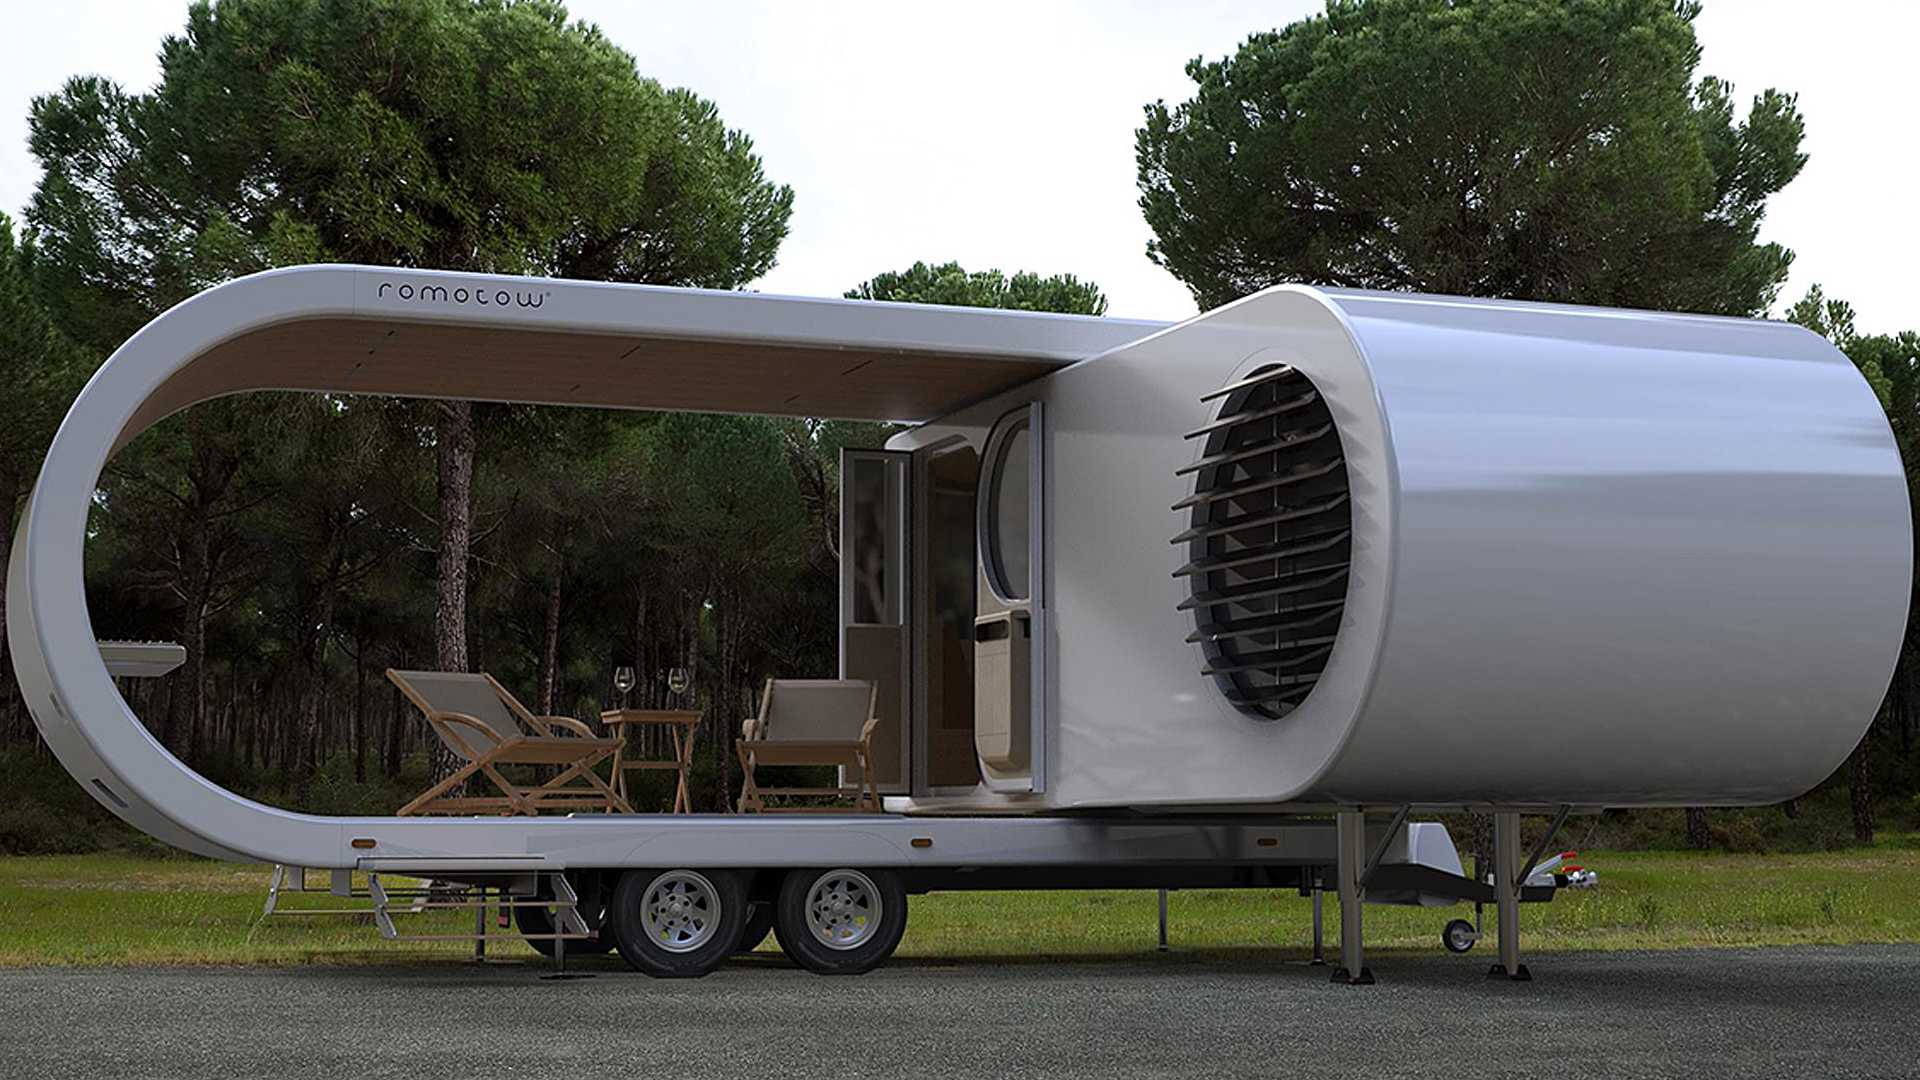 https://s1.cdn.autoevolution.com/images/news/romotow-trailer-camper-has-in-built-patio-for-the-ultimate-chill-experience-139397_1.jpg